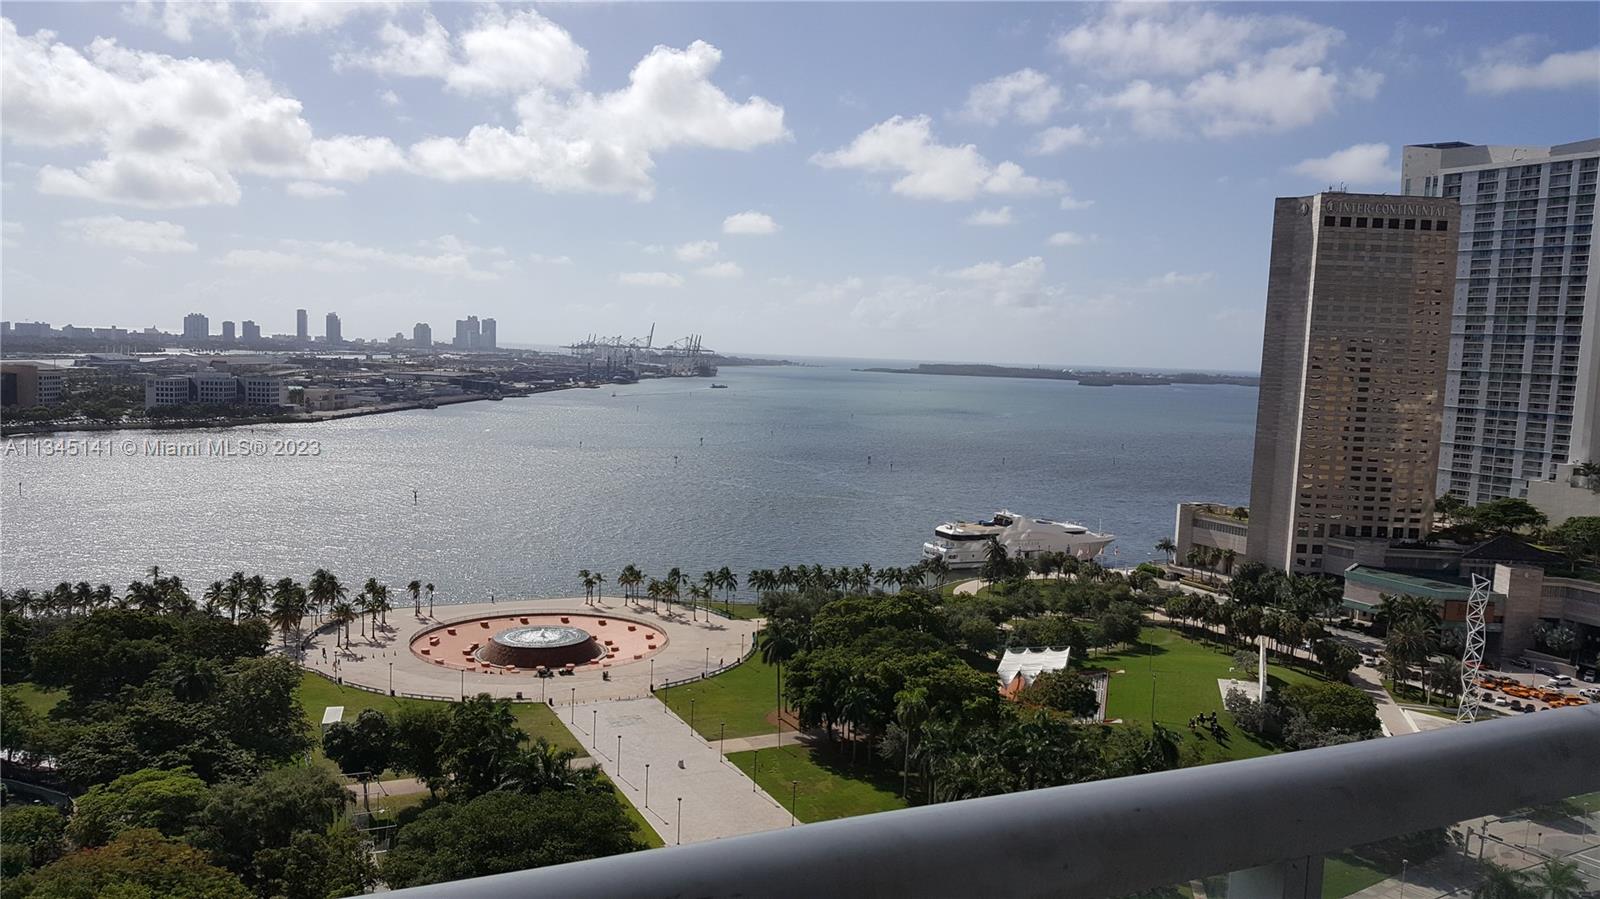 This stunning apartment (2/2 + Den) in the heart of Downtown Miami is a renter's dream come true! Wake up to spectacular views of the Miami Bay. Rent includes 1 parking space, internet, basic cable, water, sewer, and garbage as provided by the association. Access to parking security, valet parking, gym, yoga room, pool, Jacuzzi, BBQ area, full service spa, and more make this apartment one of a kind. Located walking distance from Bayside Park, FTX Arena, restaurants, supermarkets, and public transportation, this apartment is centrally located and perfect for anyone looking to experience the best of Miami. Don't miss out on this amazing opportunity!